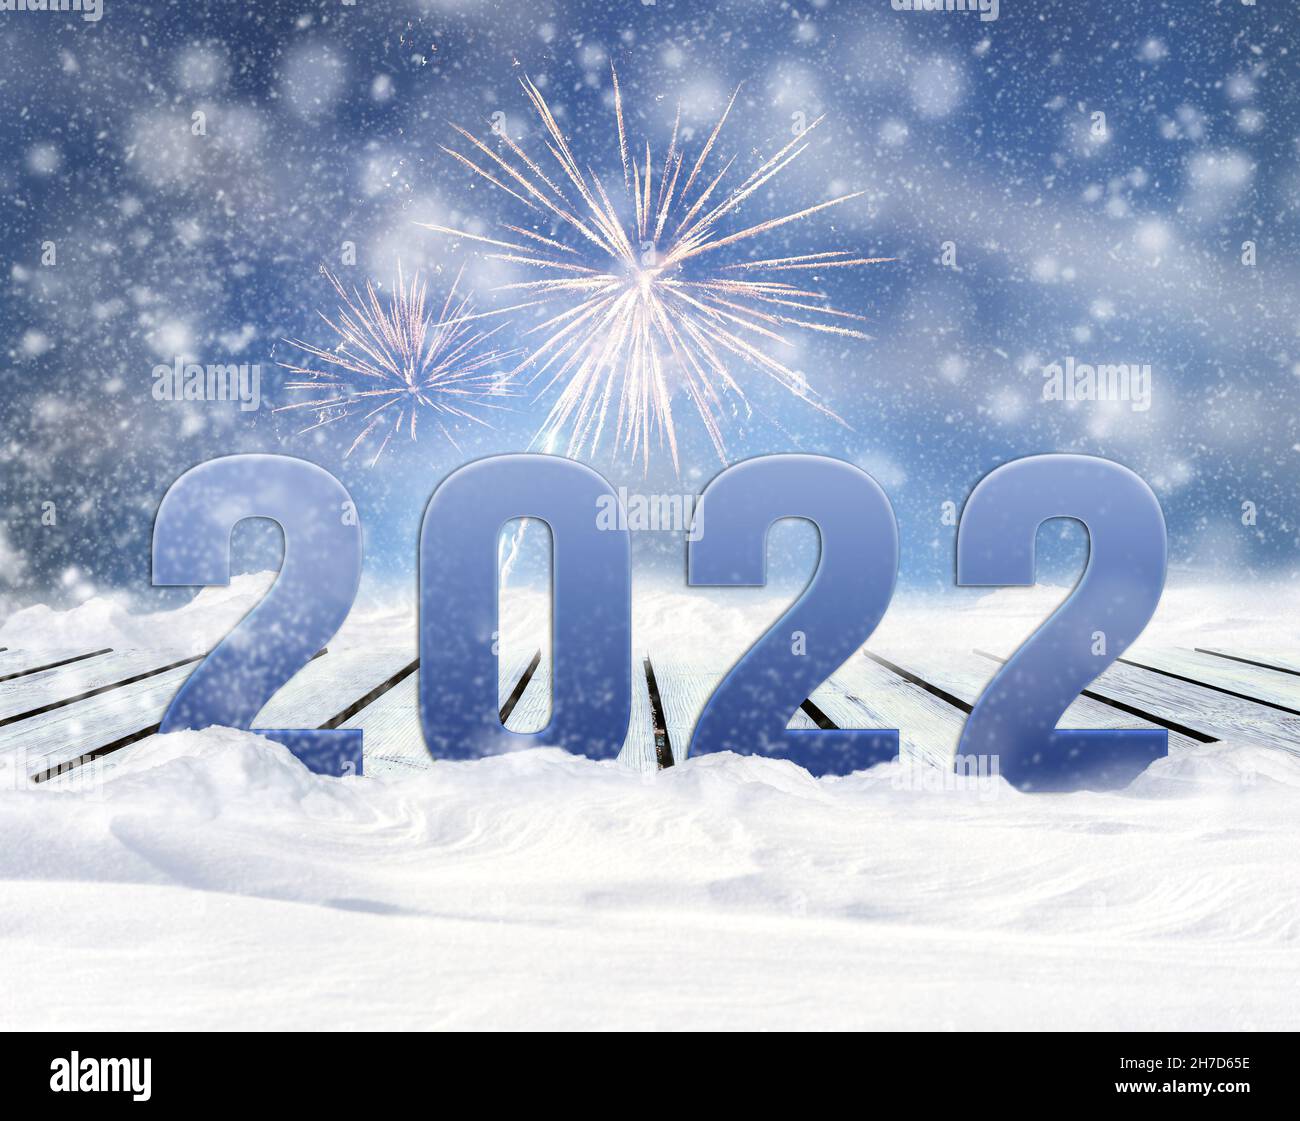 New year 2022, banner greeting card layout with snow. Festive composition of numbers 2022, blue background Stock Photo